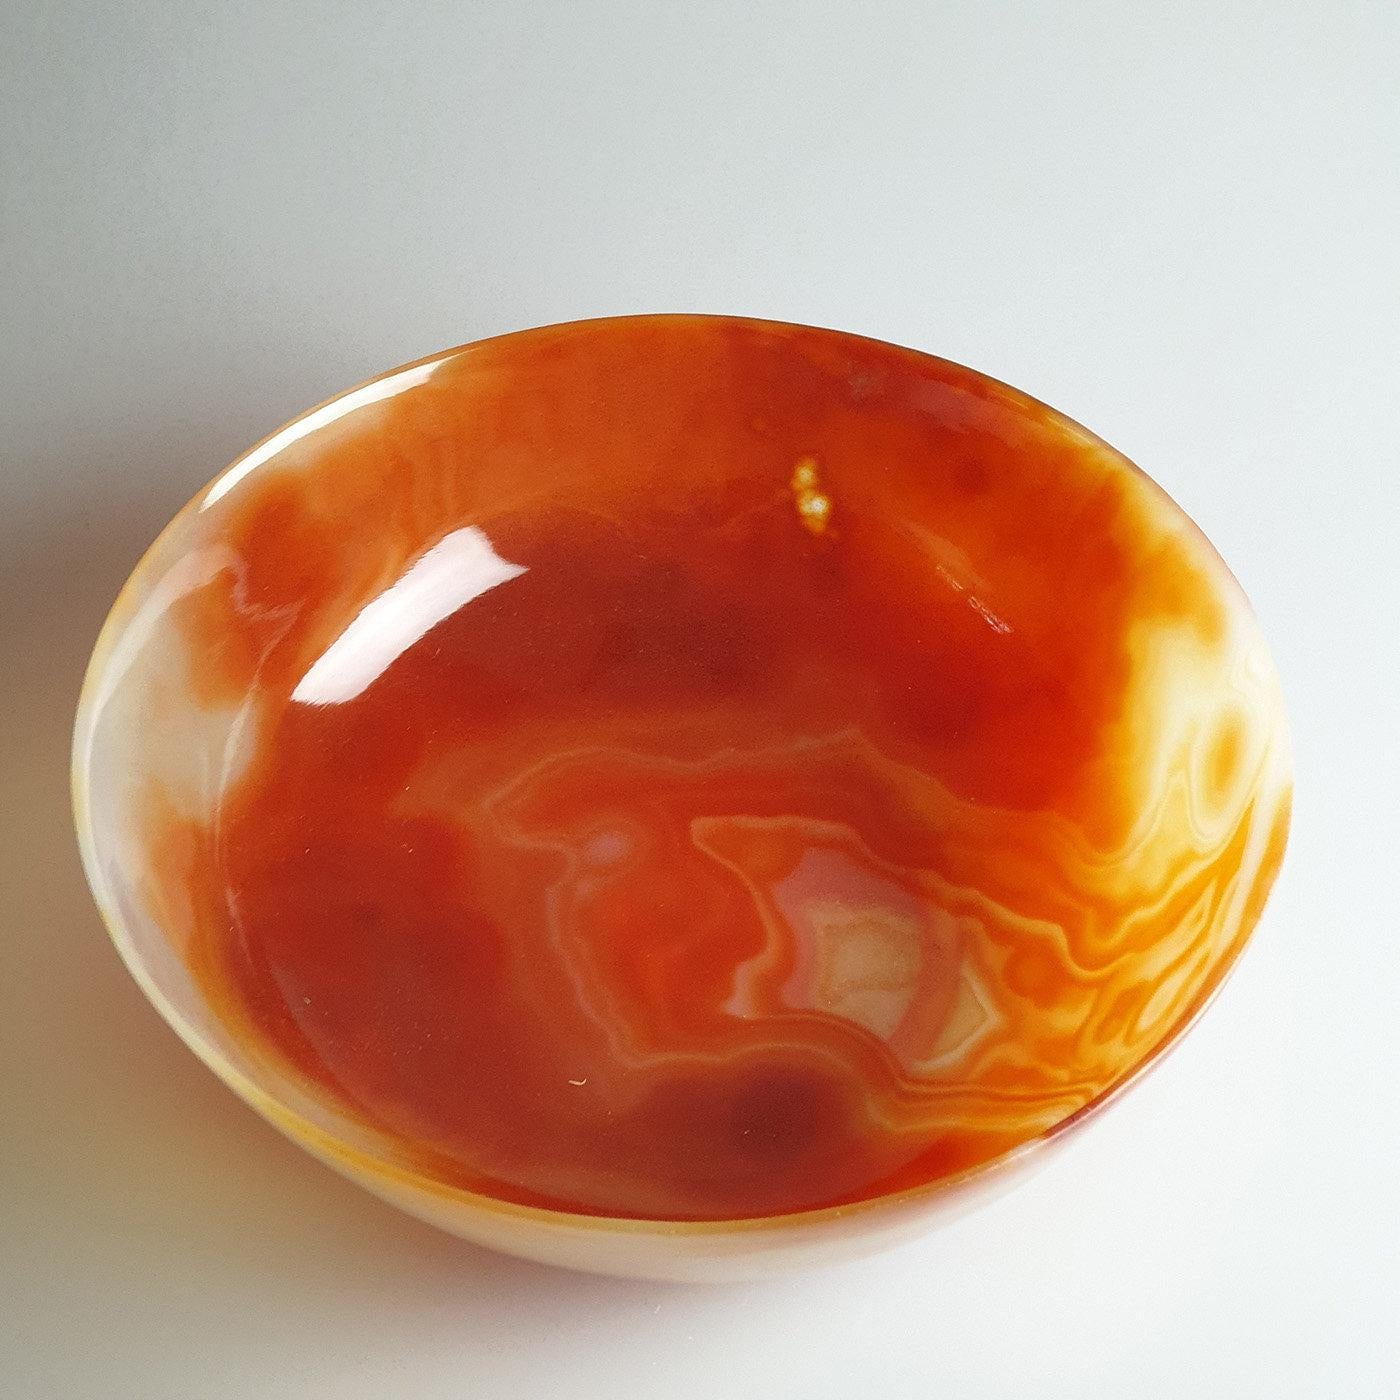 Boasting a dynamic and elegant interplay of colors, this bowl is manufactured from a single piece of the Brazilian carnelian agate. Ranging from a dark red to a rusty brown color, it features delicate shades that darken from the flared rim of the